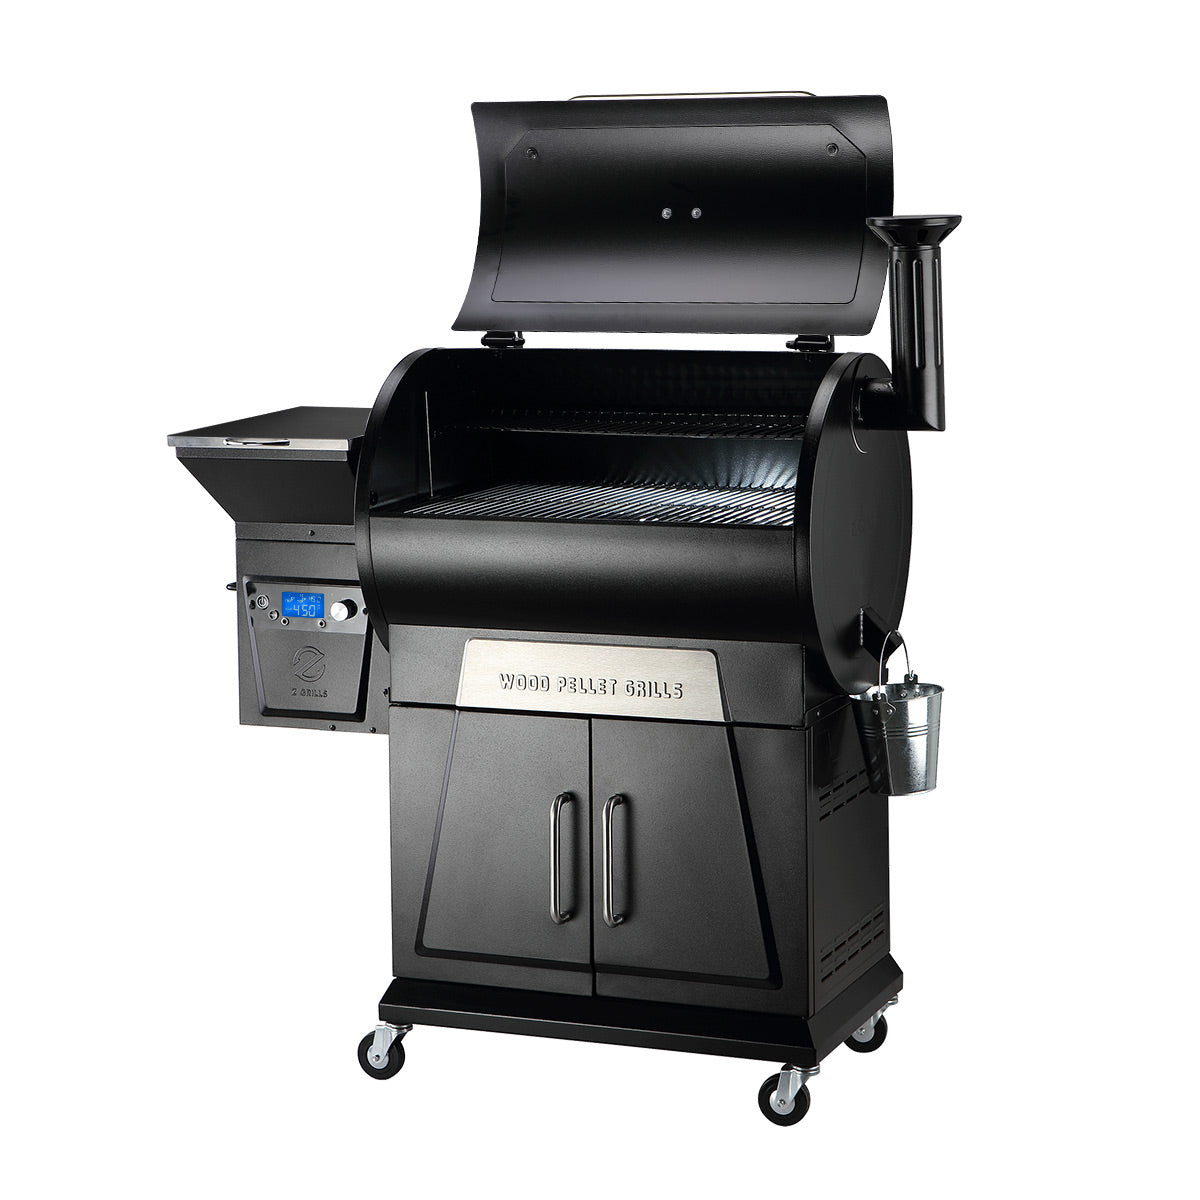 2022 NEW ARRIVAL Z GRILLS-700D3